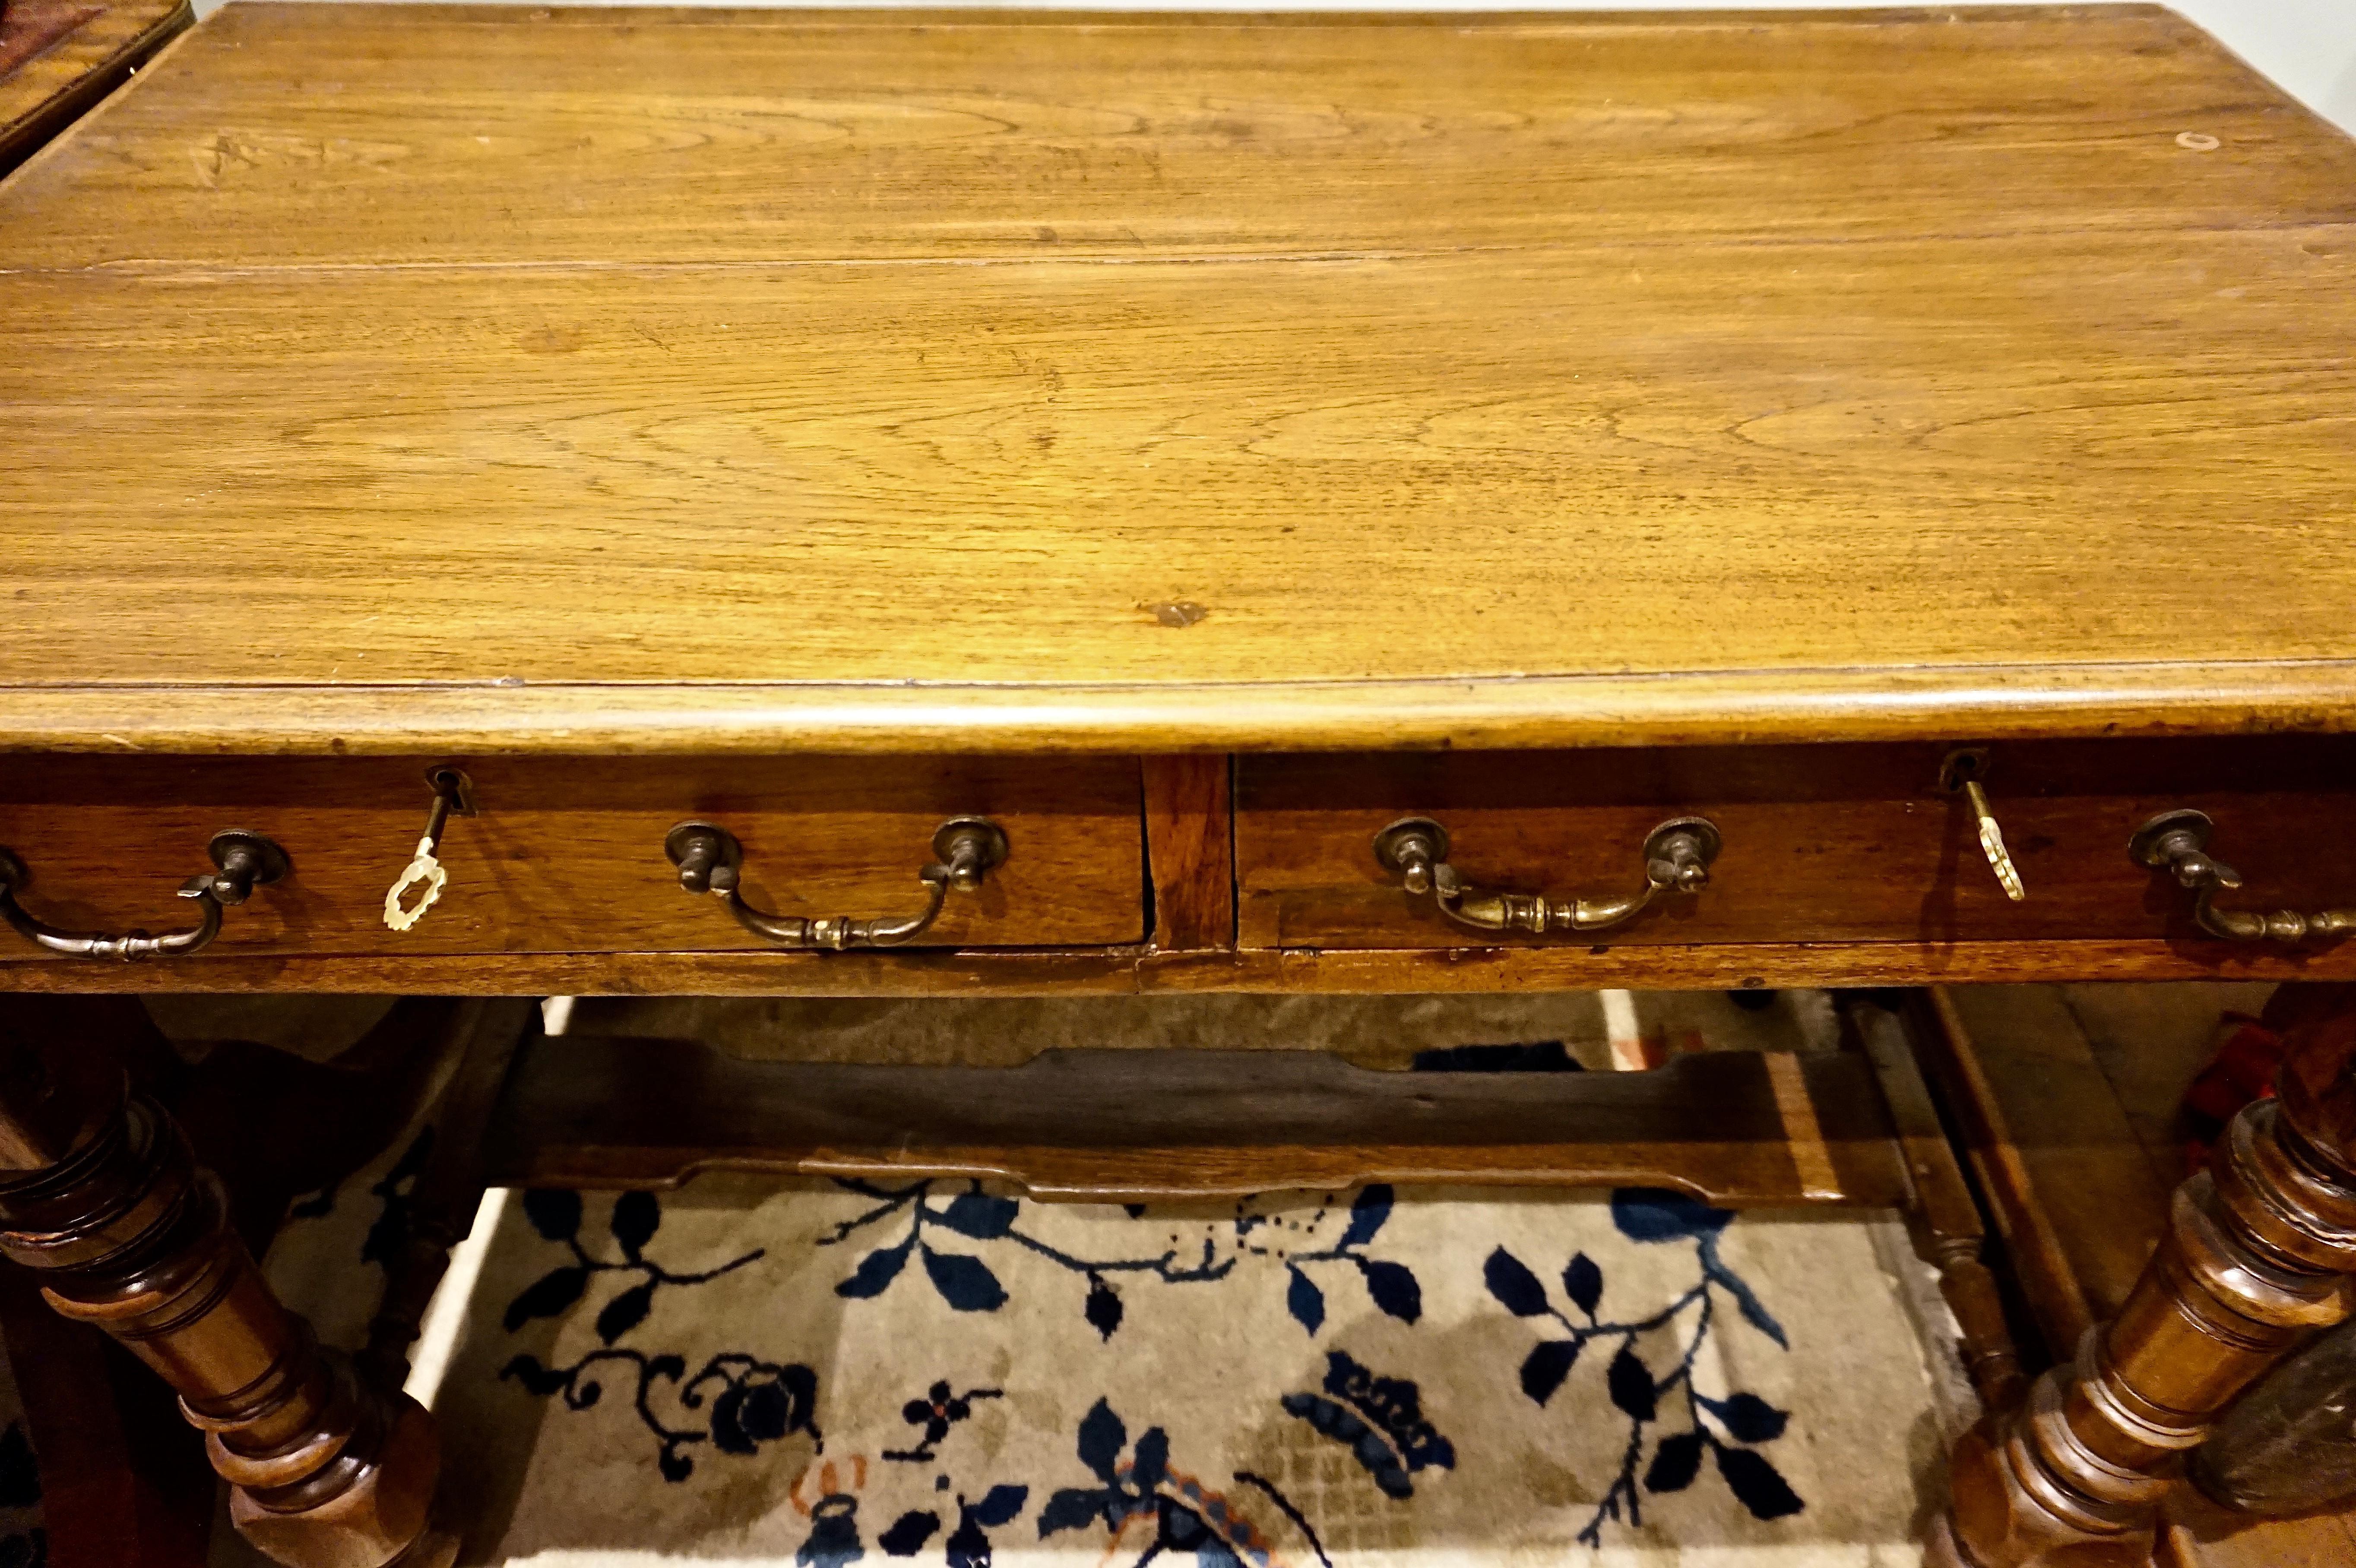 Dutch colonial teak desk with brass hardware.
Solid carved legs united by footrest stretcher. Old brass handles and peg work joinery throughout. Locks have been replaced at some point but come with keys and work. Some repair to tabletop,
circa